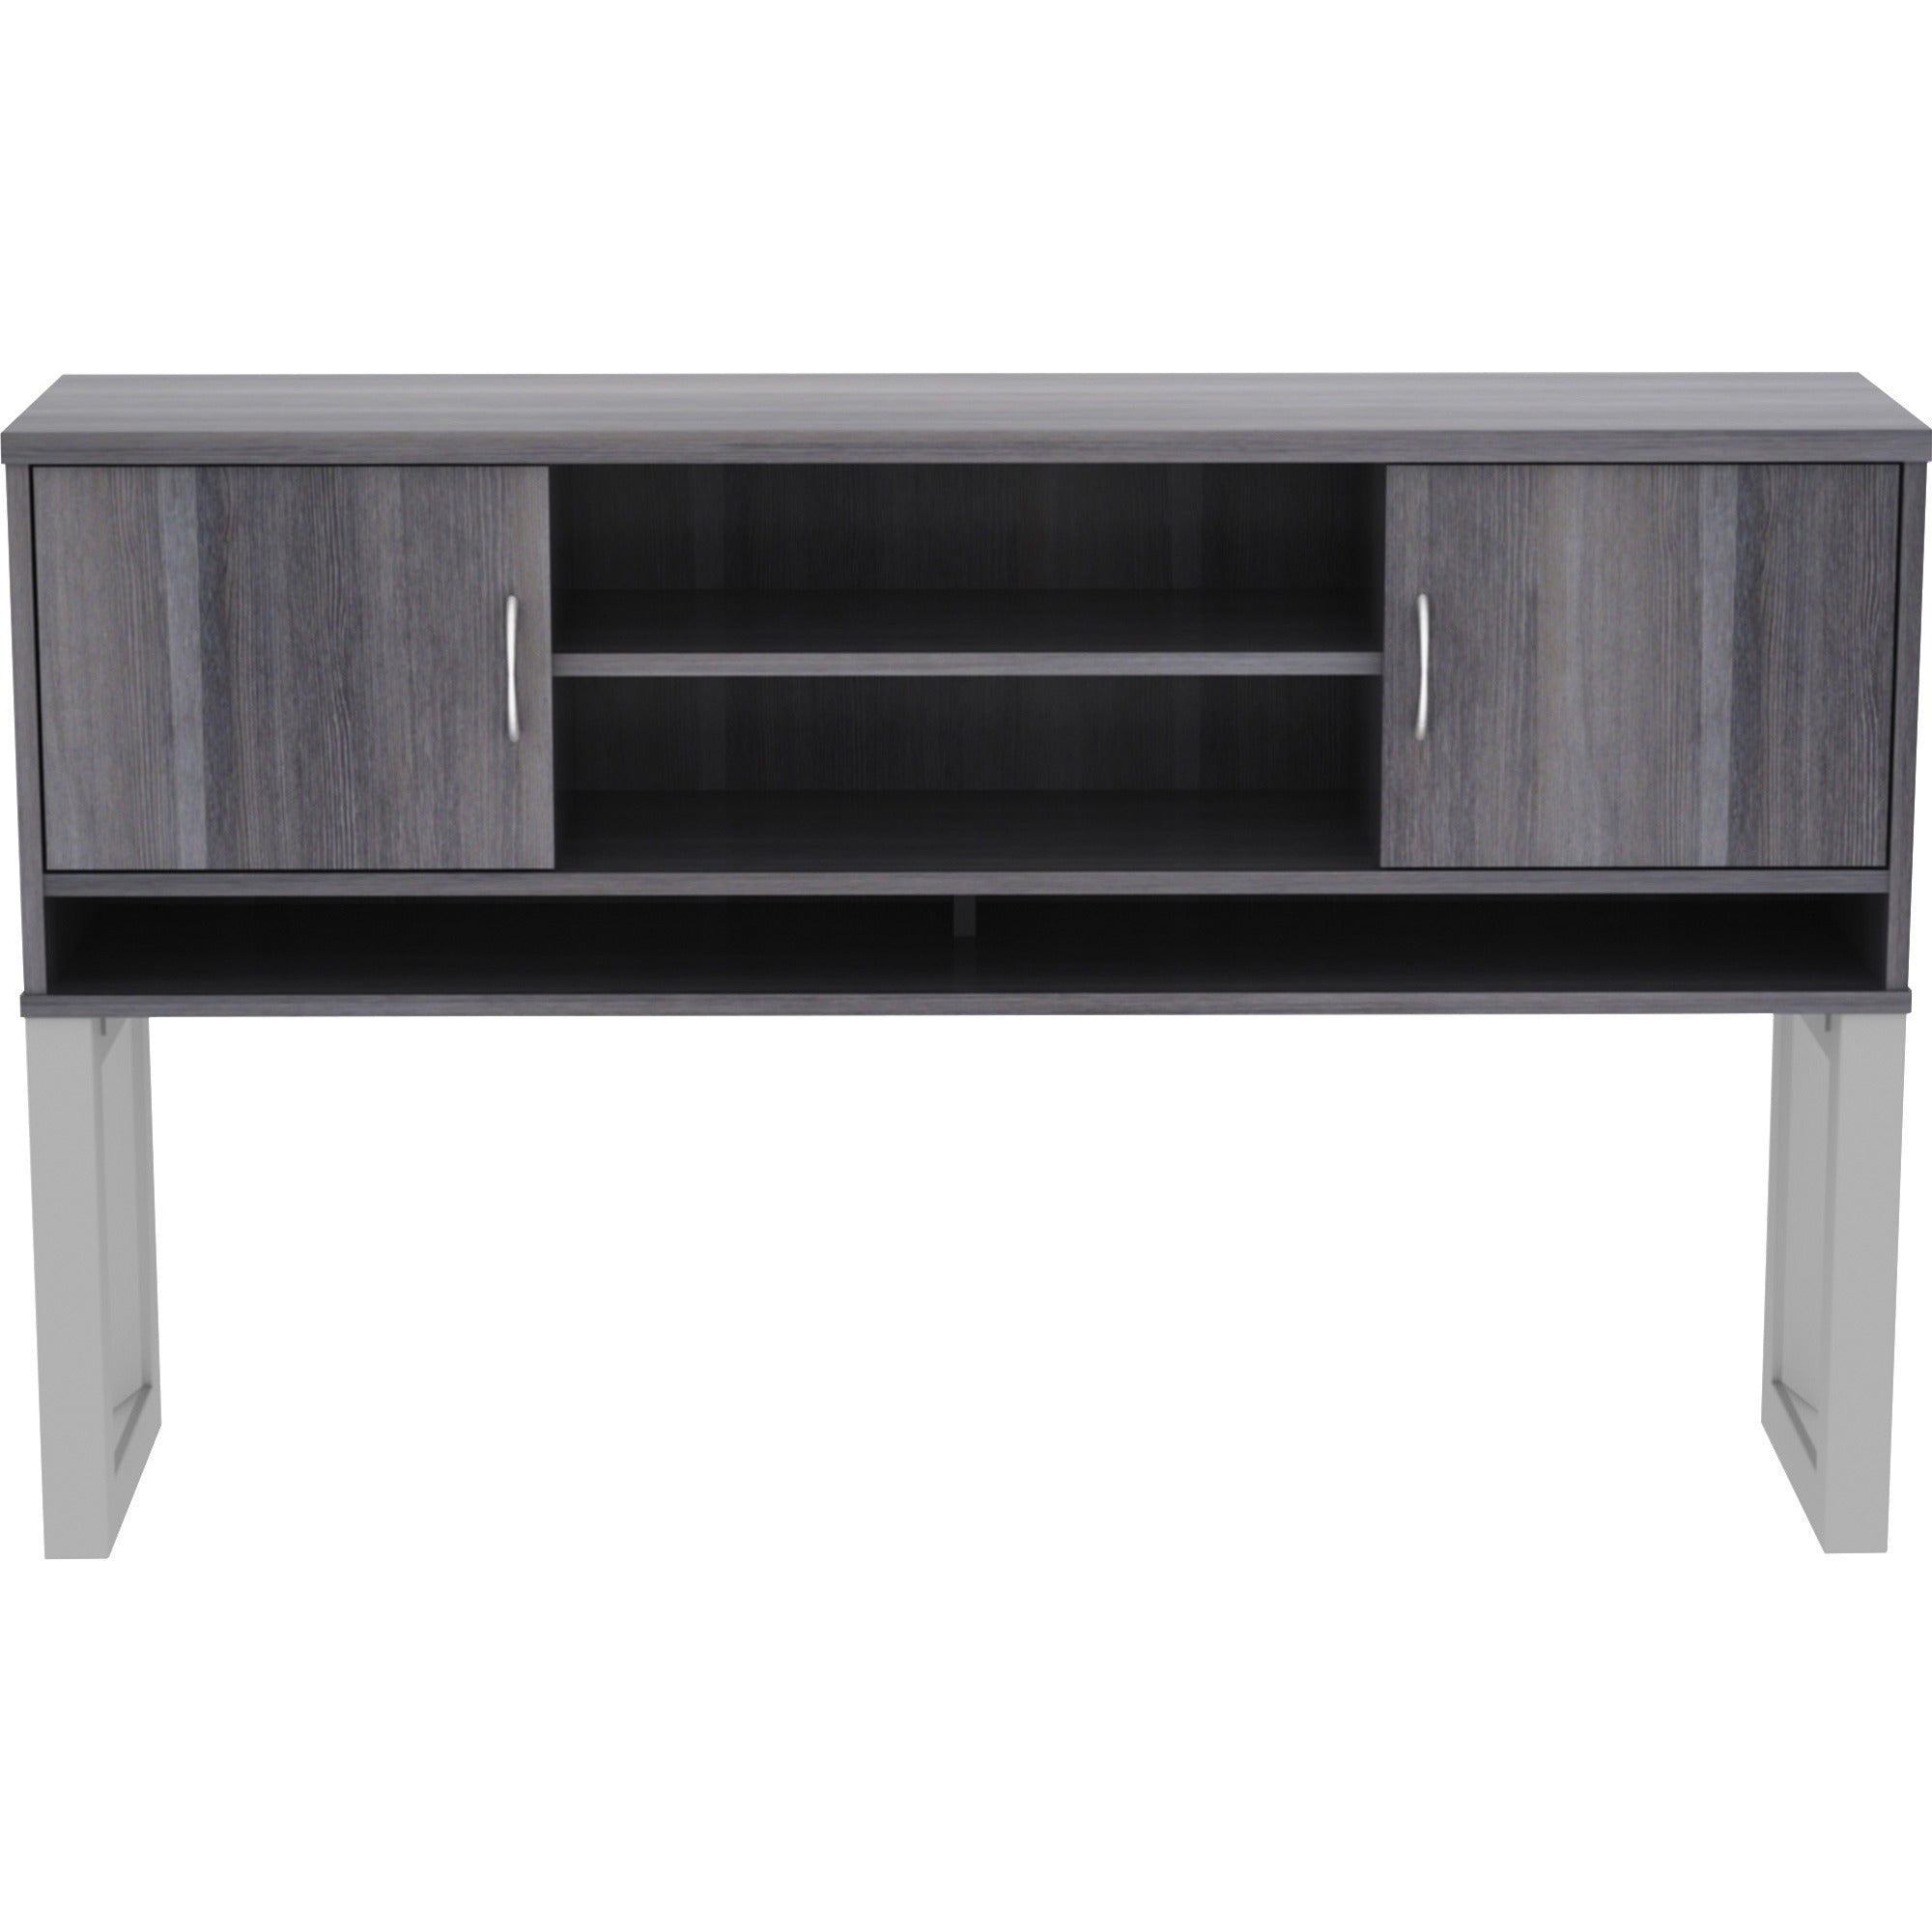 lorell-relevance-series-freestanding-hutch-59-x-1536-3-shelves-finish-charcoal-laminate_llr16219 - 2